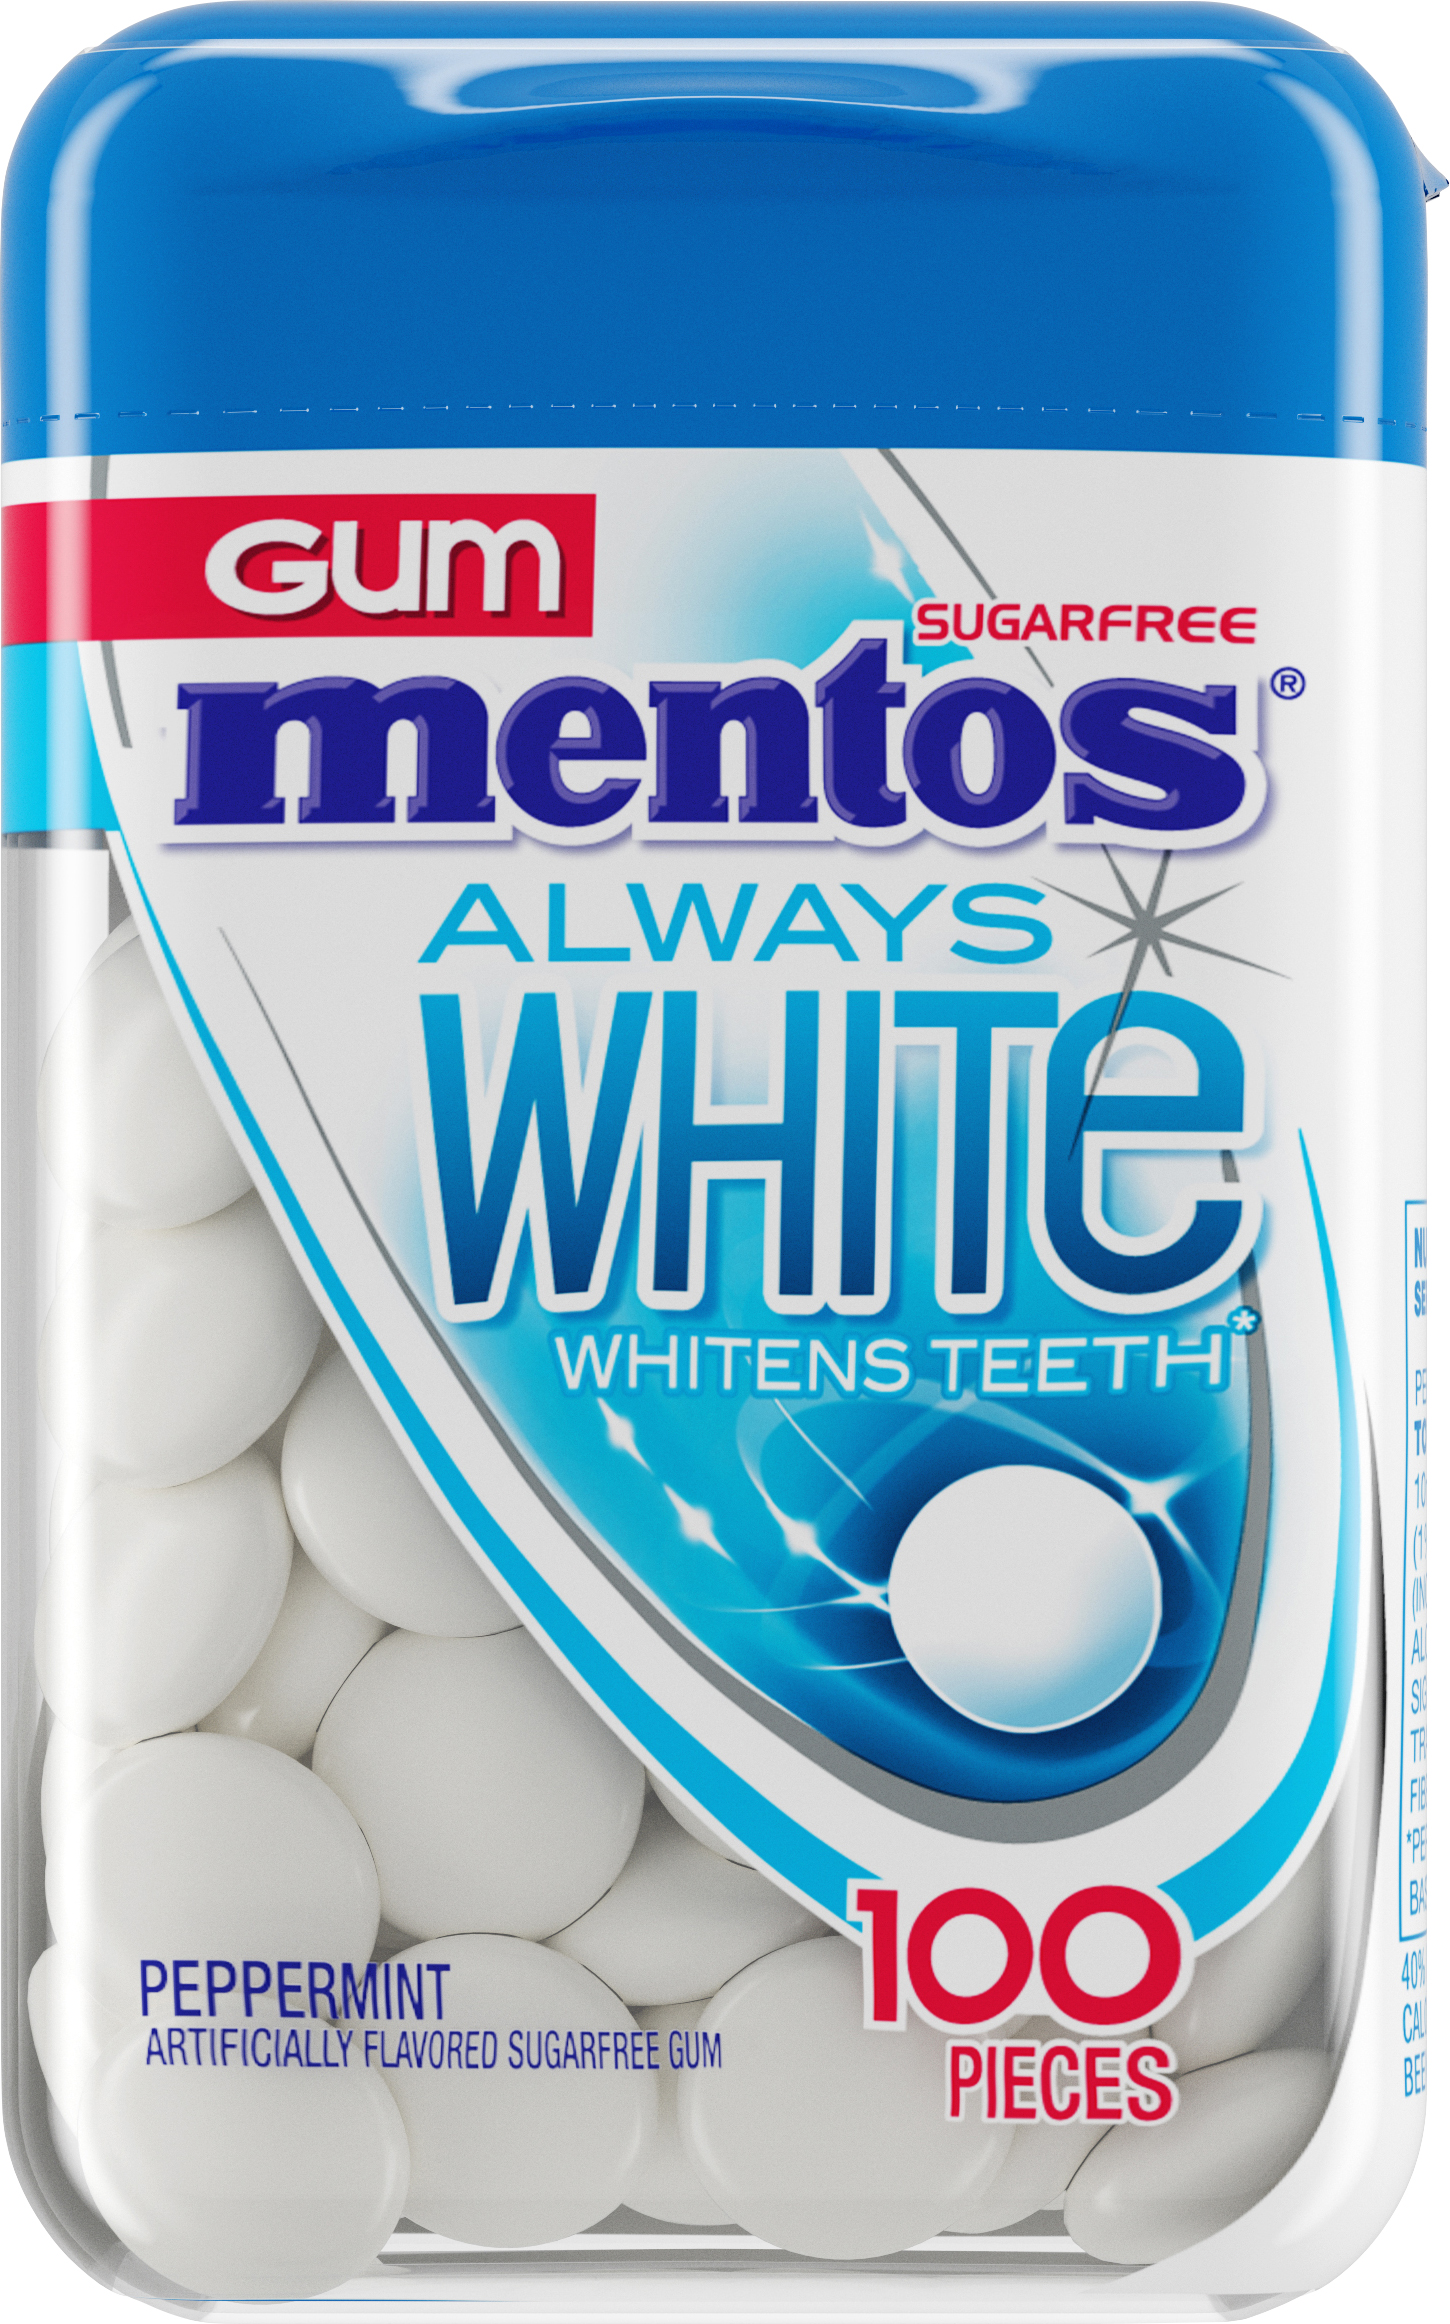 Mentos Always White Peppermint Flavored Gum, 100 Piece Bottle - image 3 of 4